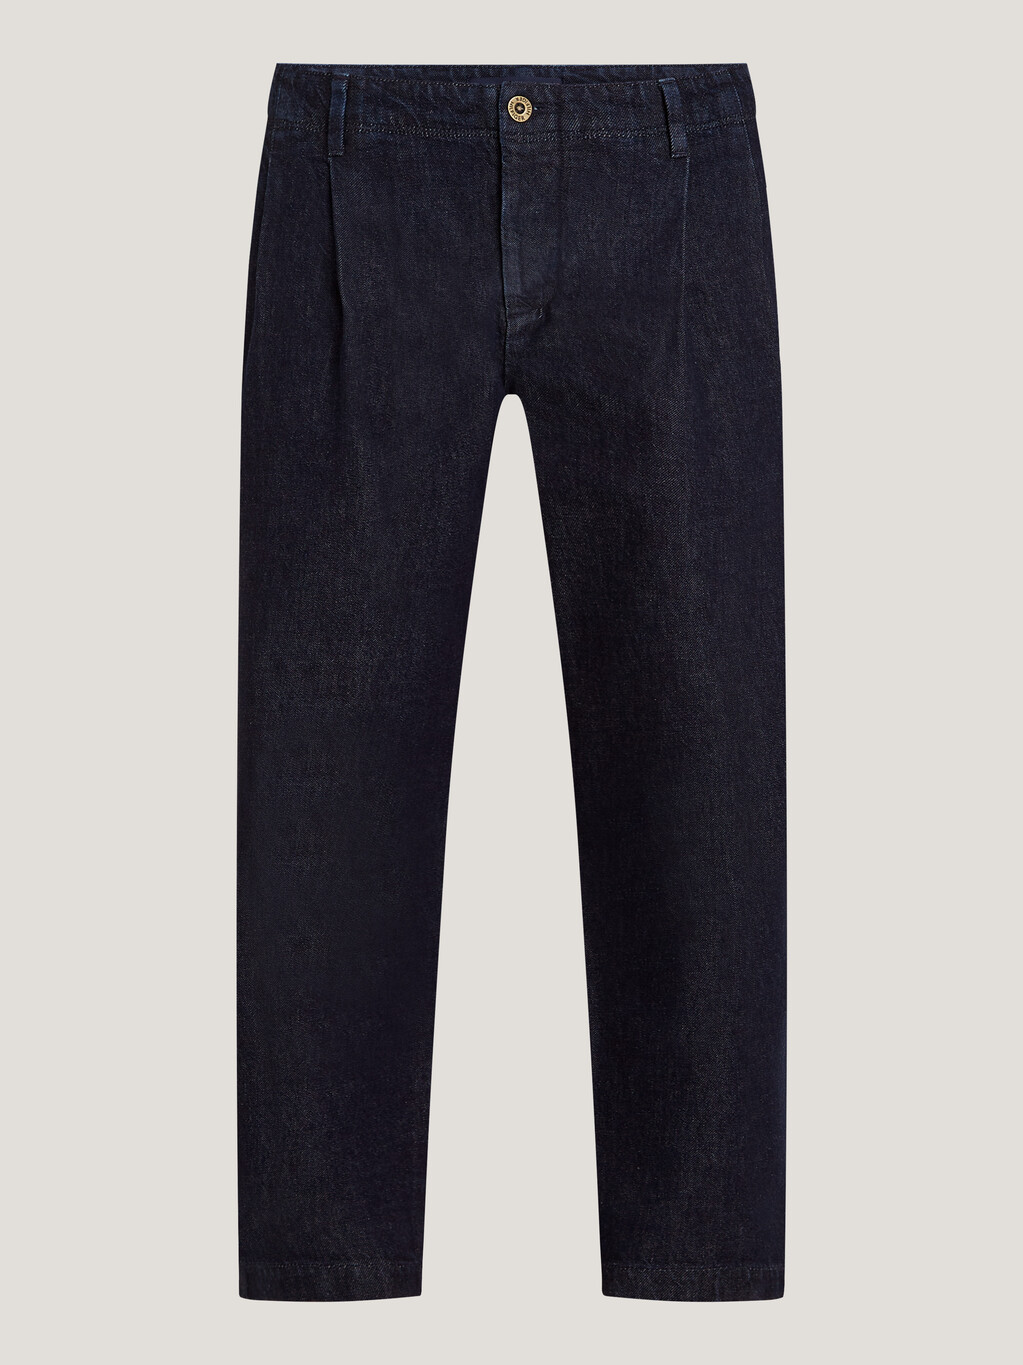 Denim Pleated Relaxed Fit Chinos, Bow Blue, hi-res